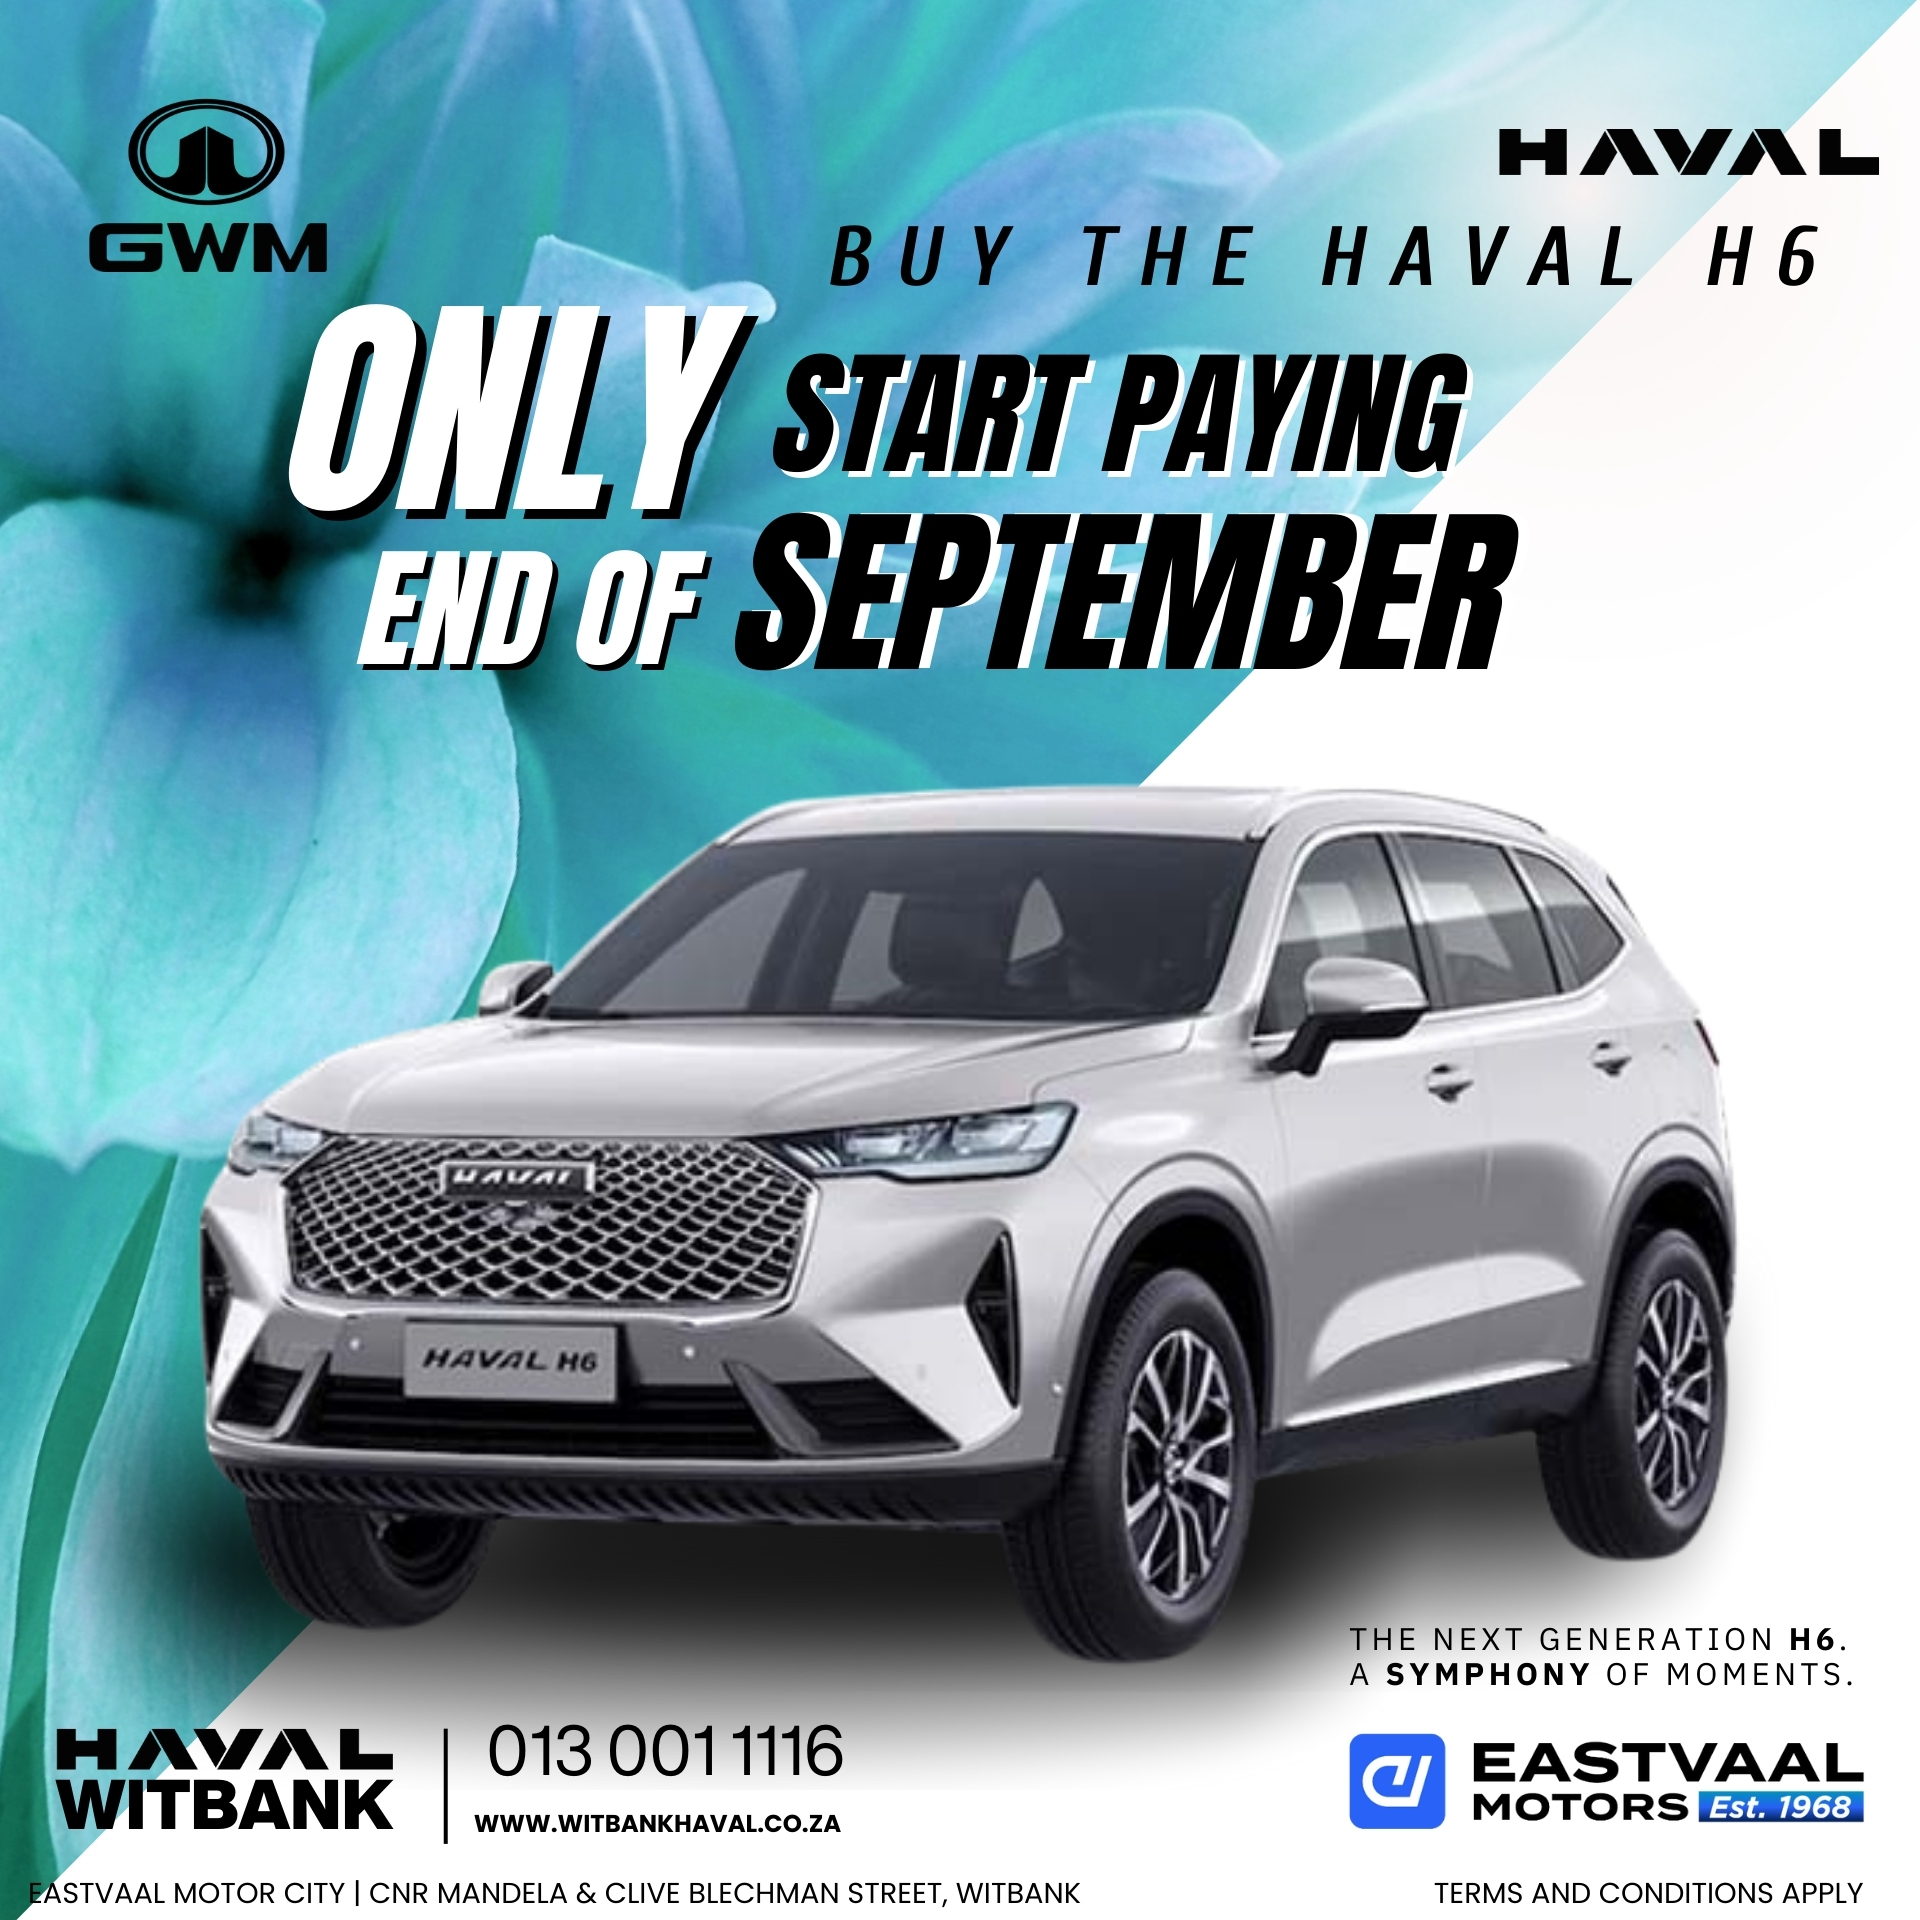 Upgrade to luxury this July with a Haval GWM. Exceptional value, unmatched performance! image from 